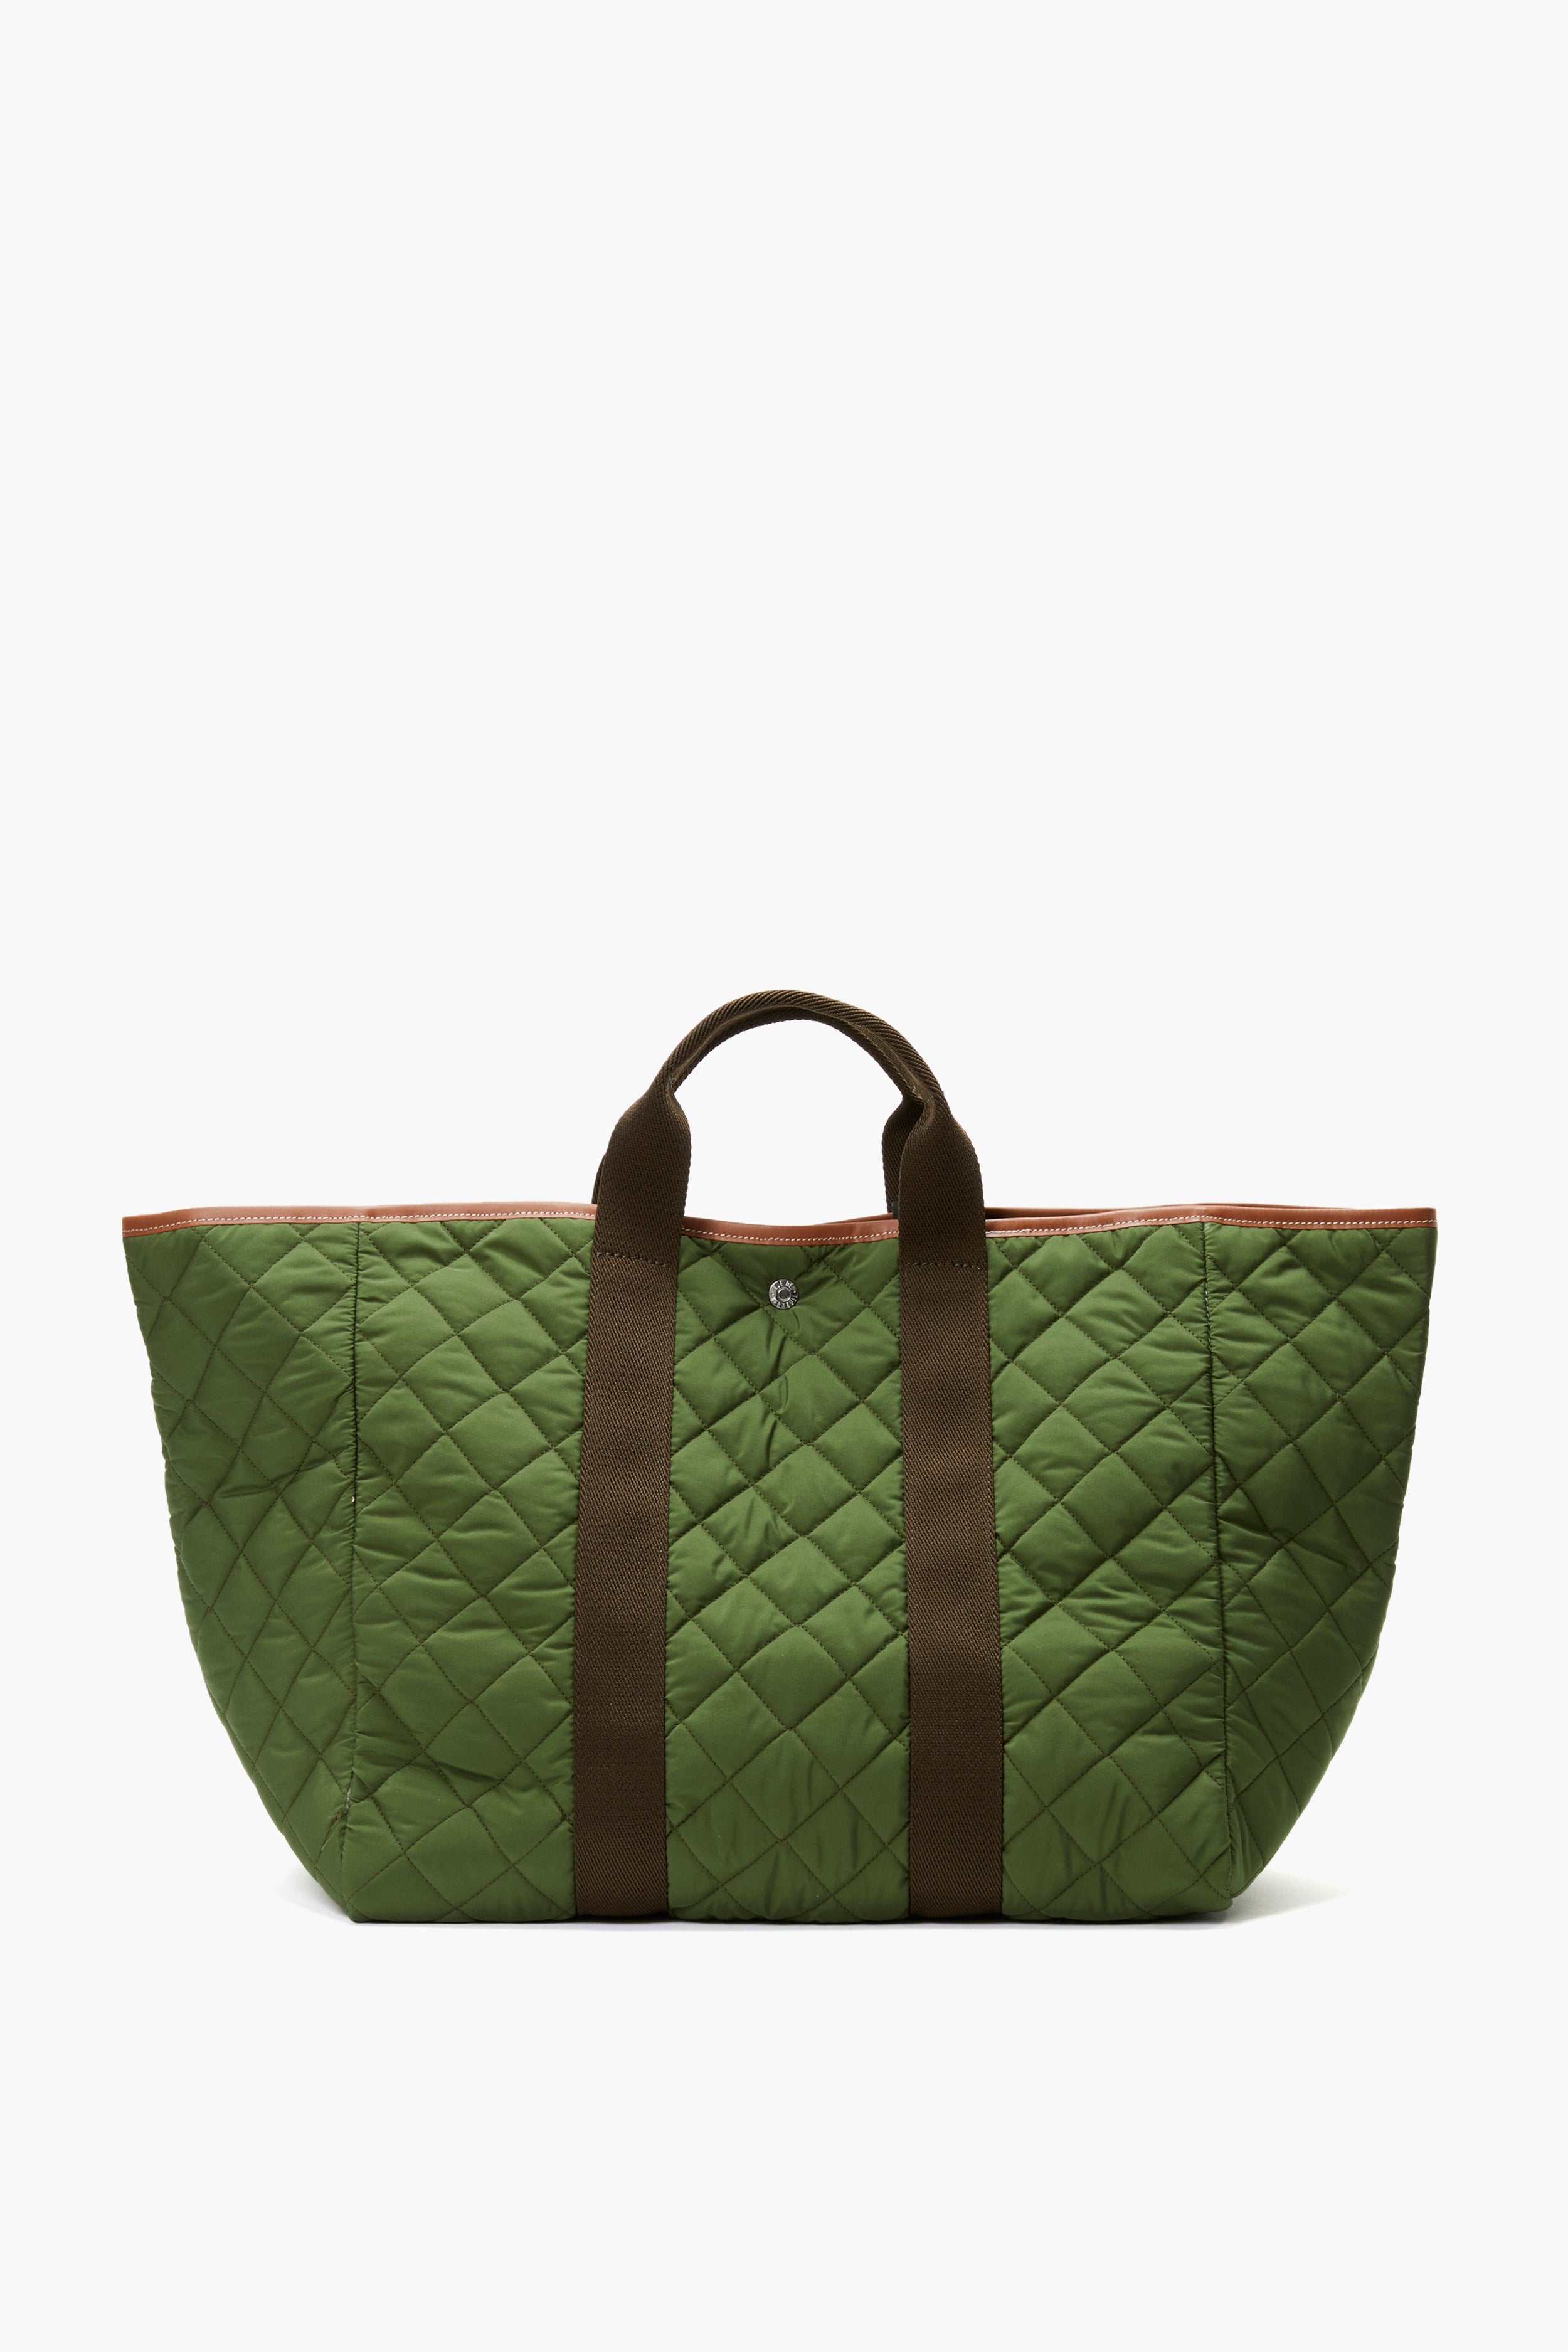 Jen & Co Clare Quilted Satchel Bag